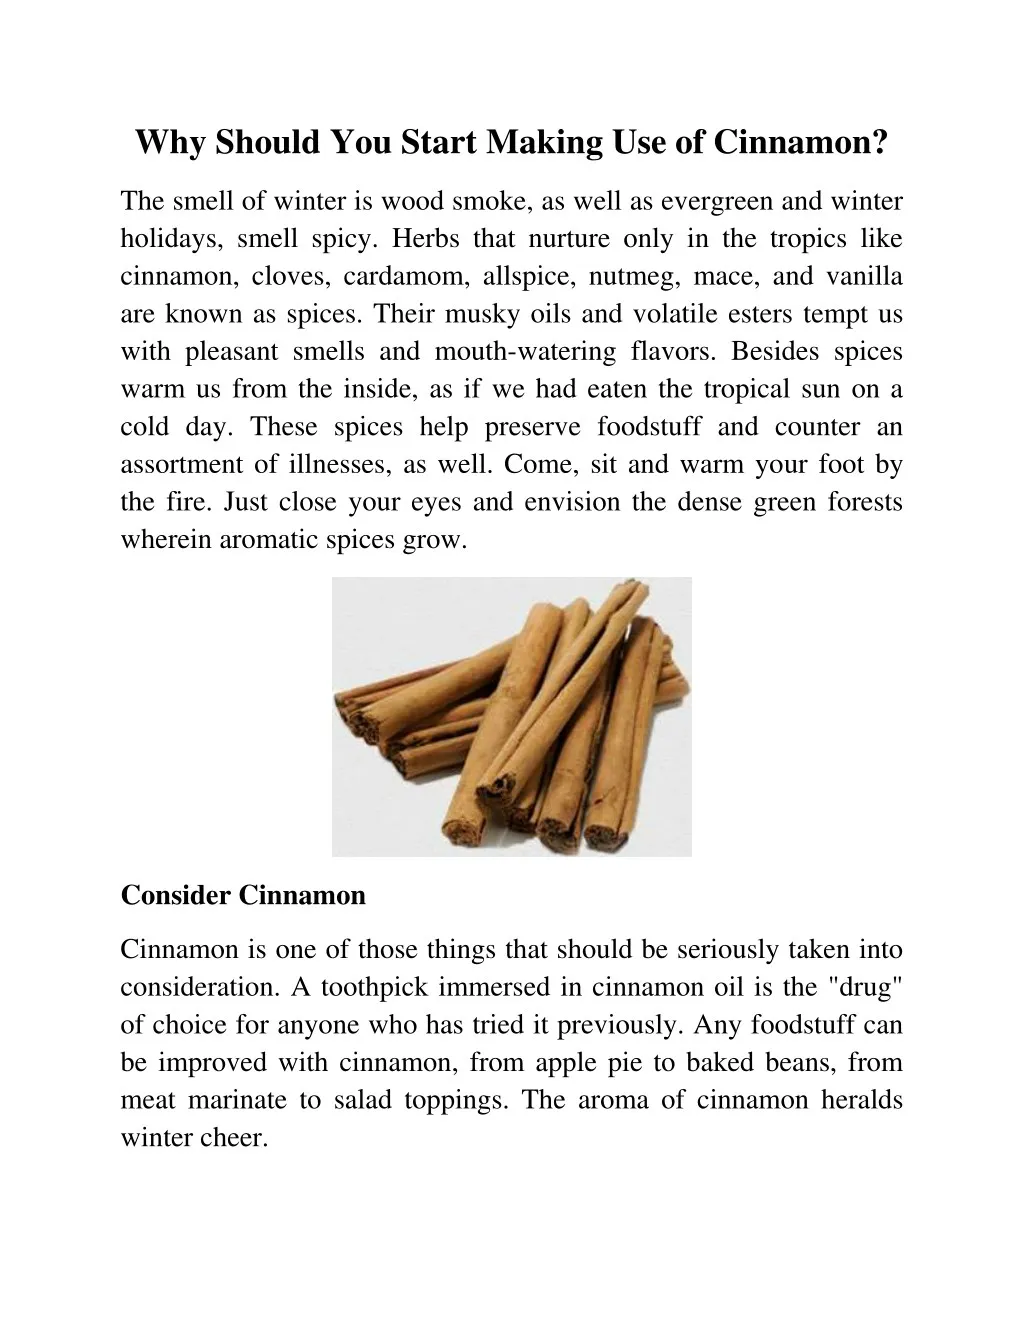 why should you start making use of cinnamon